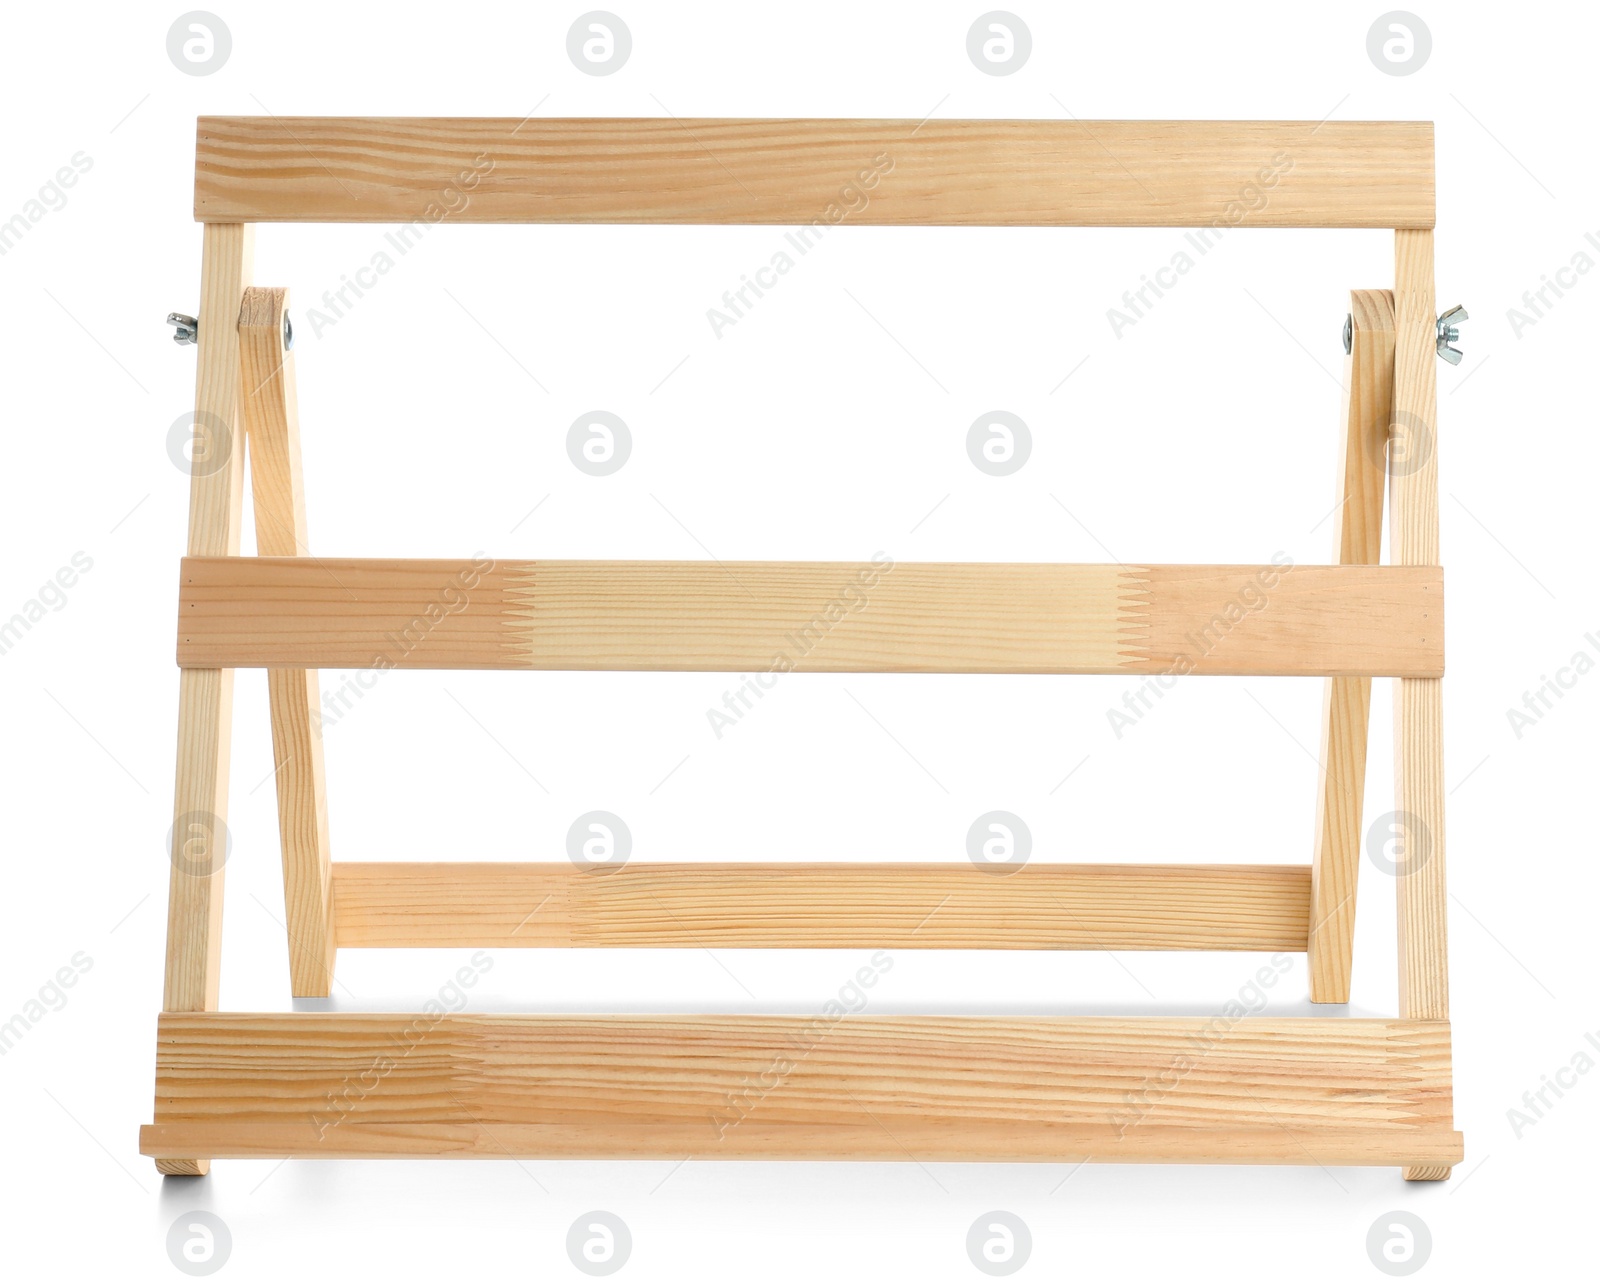 Photo of Empty wooden easel isolated on white. Equipment for art